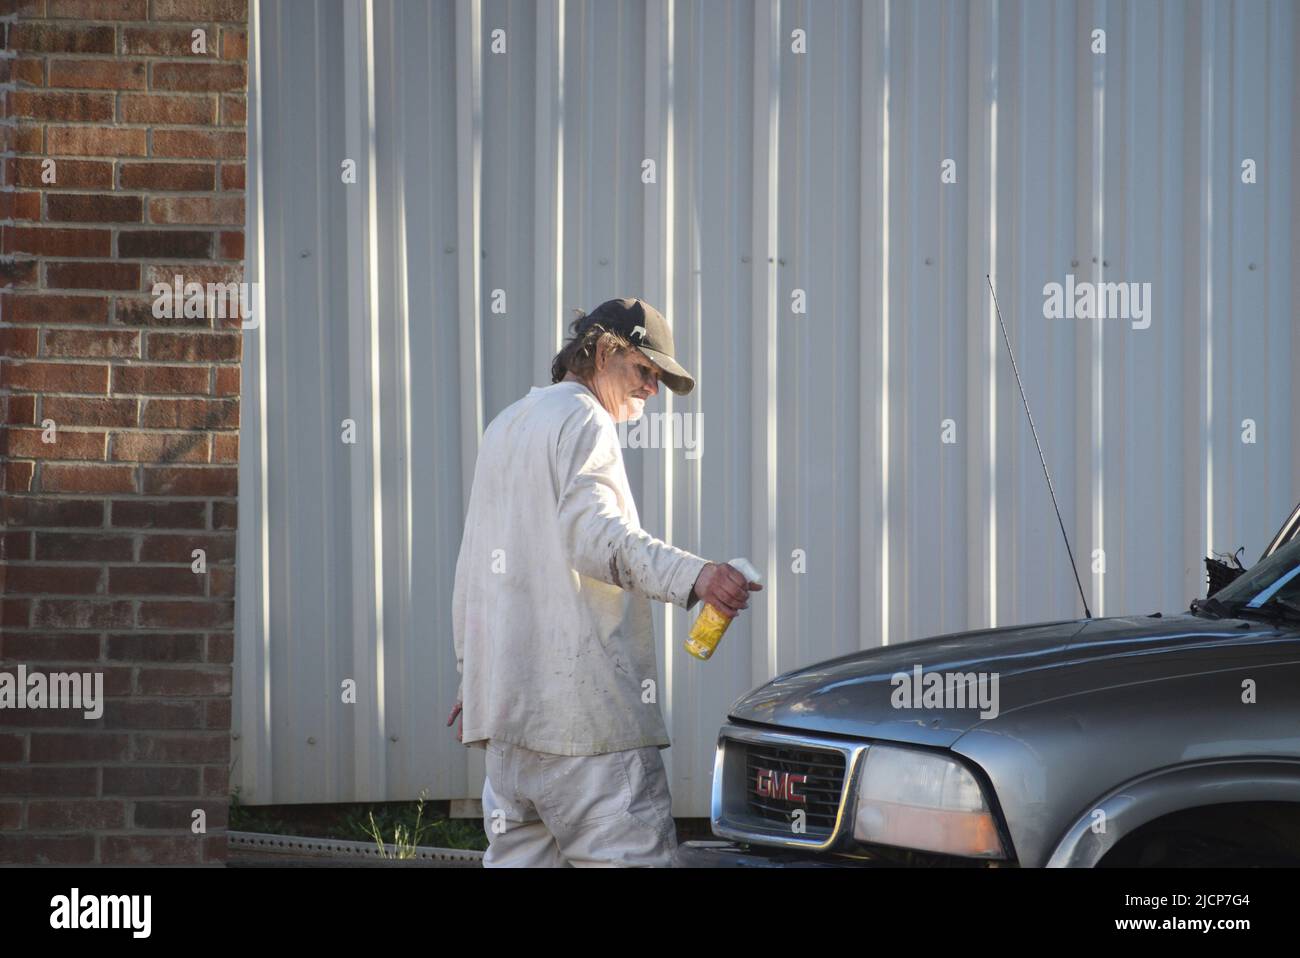 Man spraying polish or cleaner on the hood of his GMC SUV Stock Photo